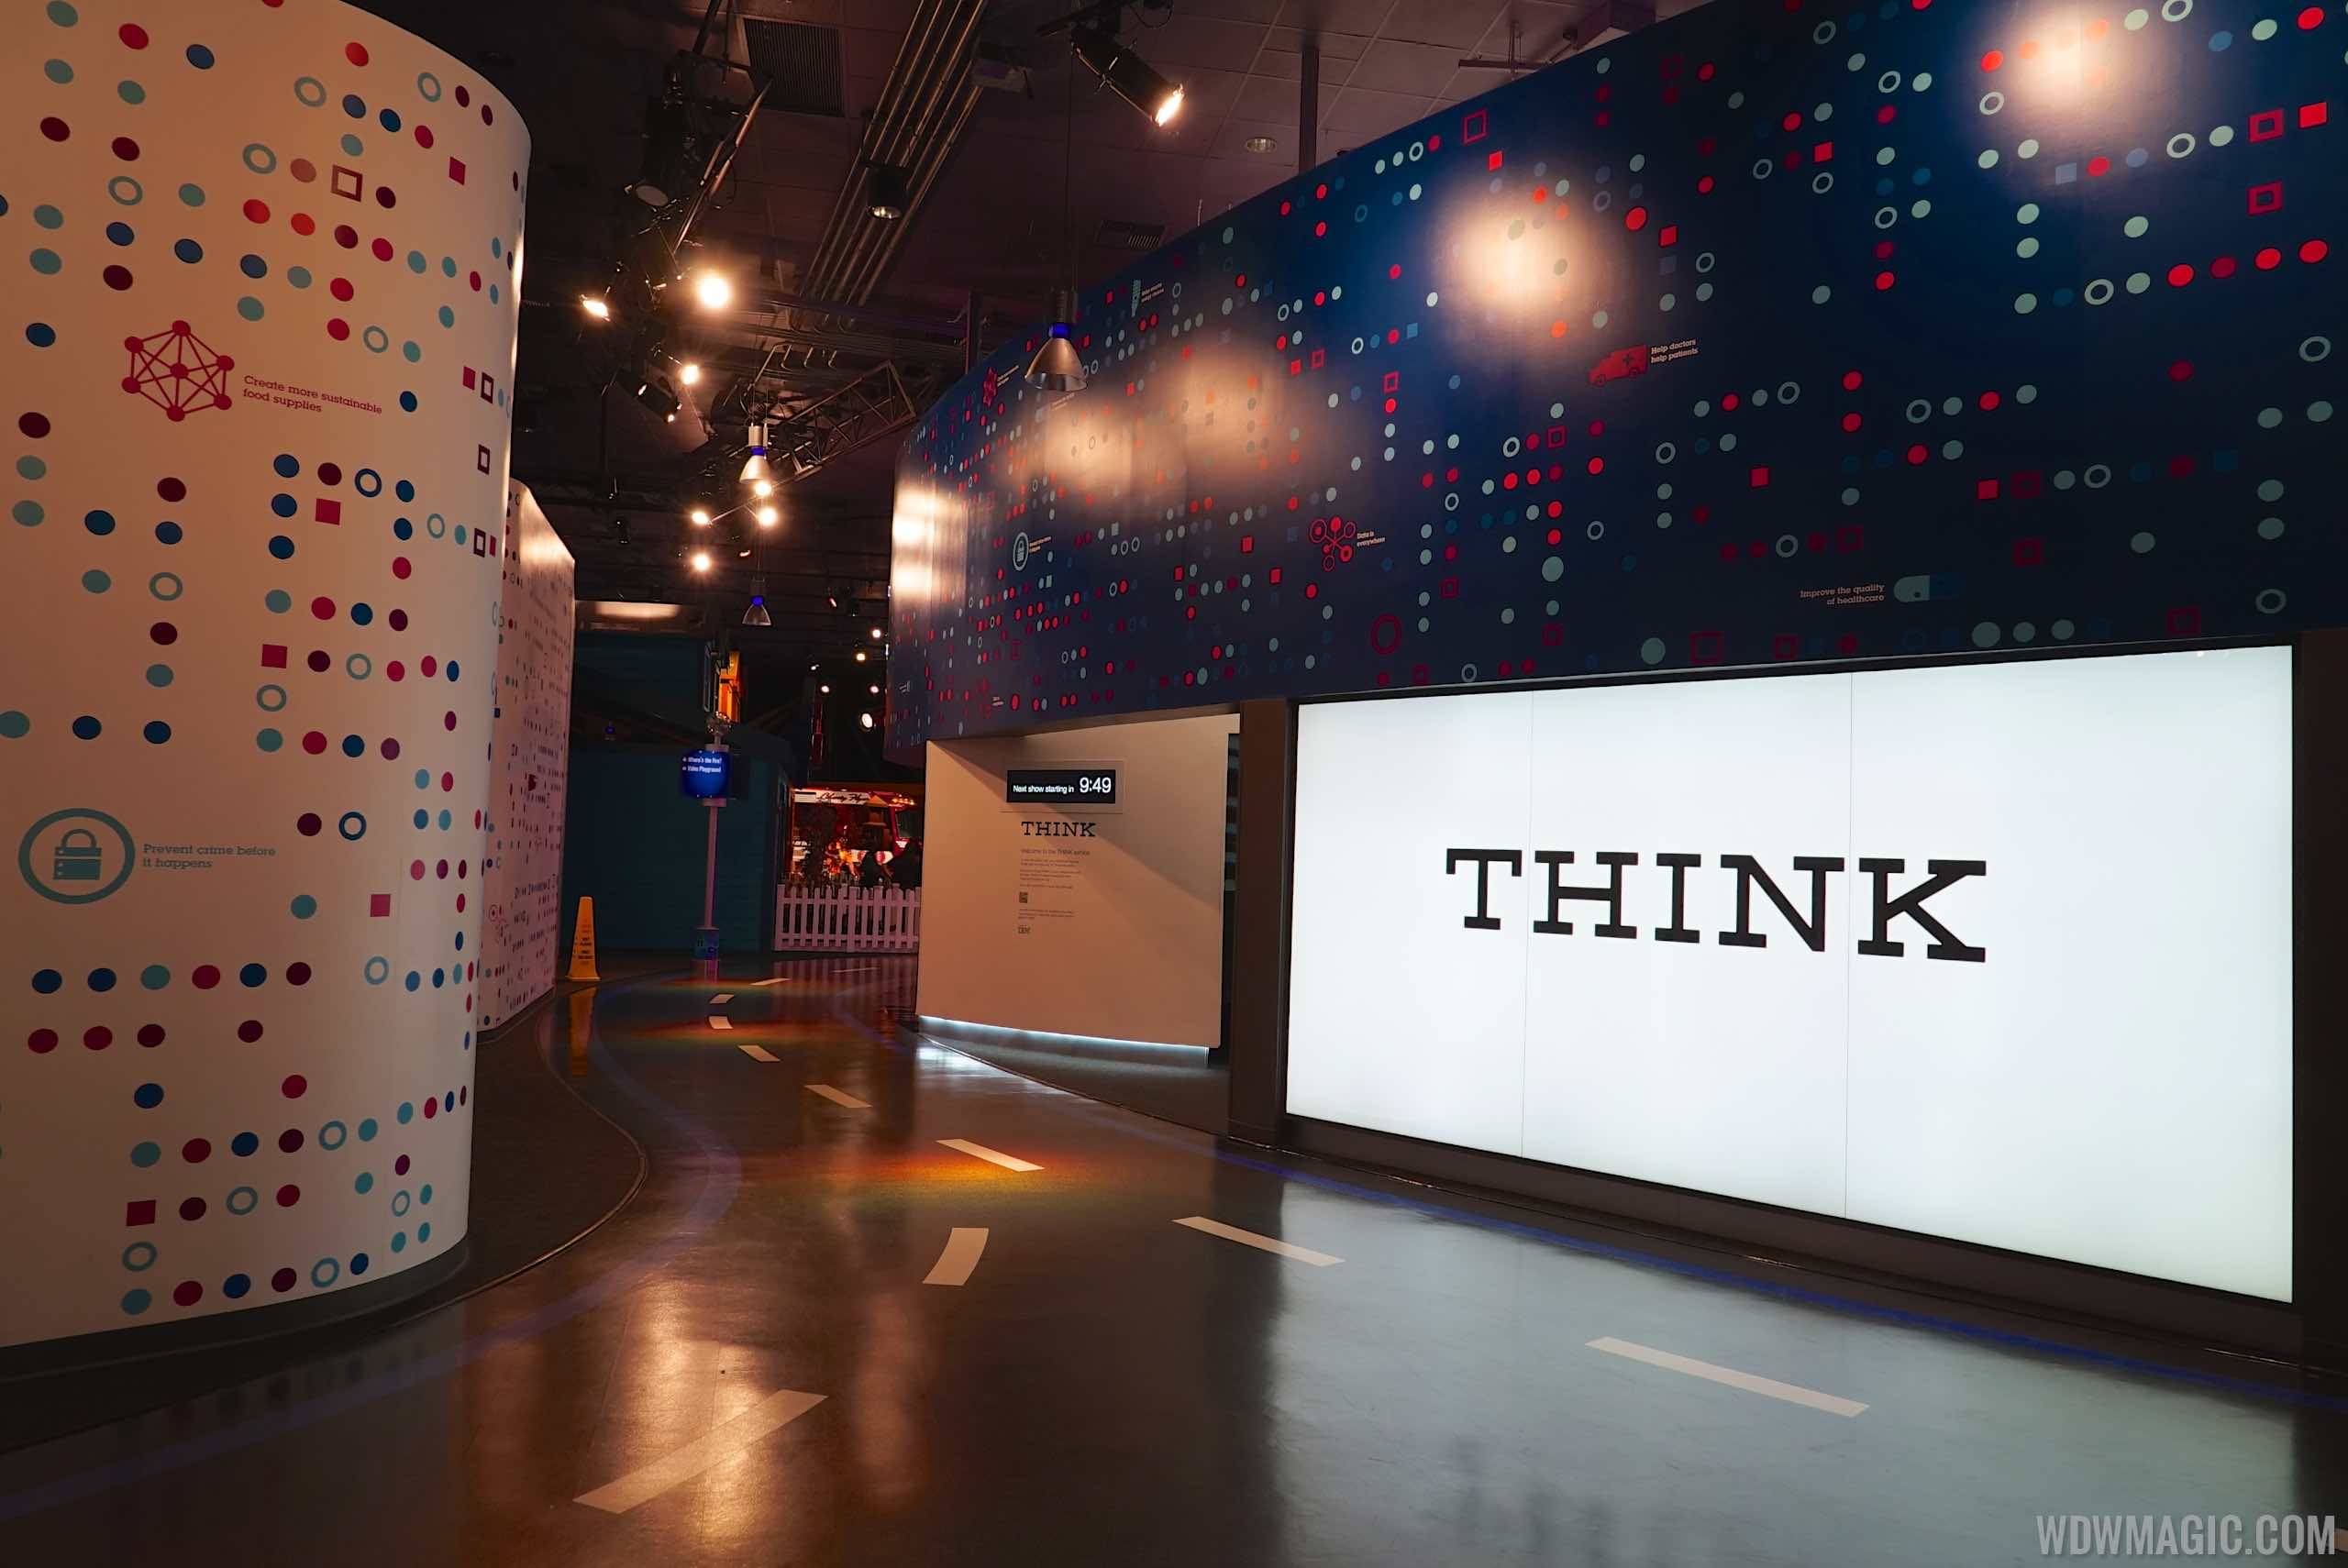 IBM's THINK and Test the Limits exhibits to close in early January